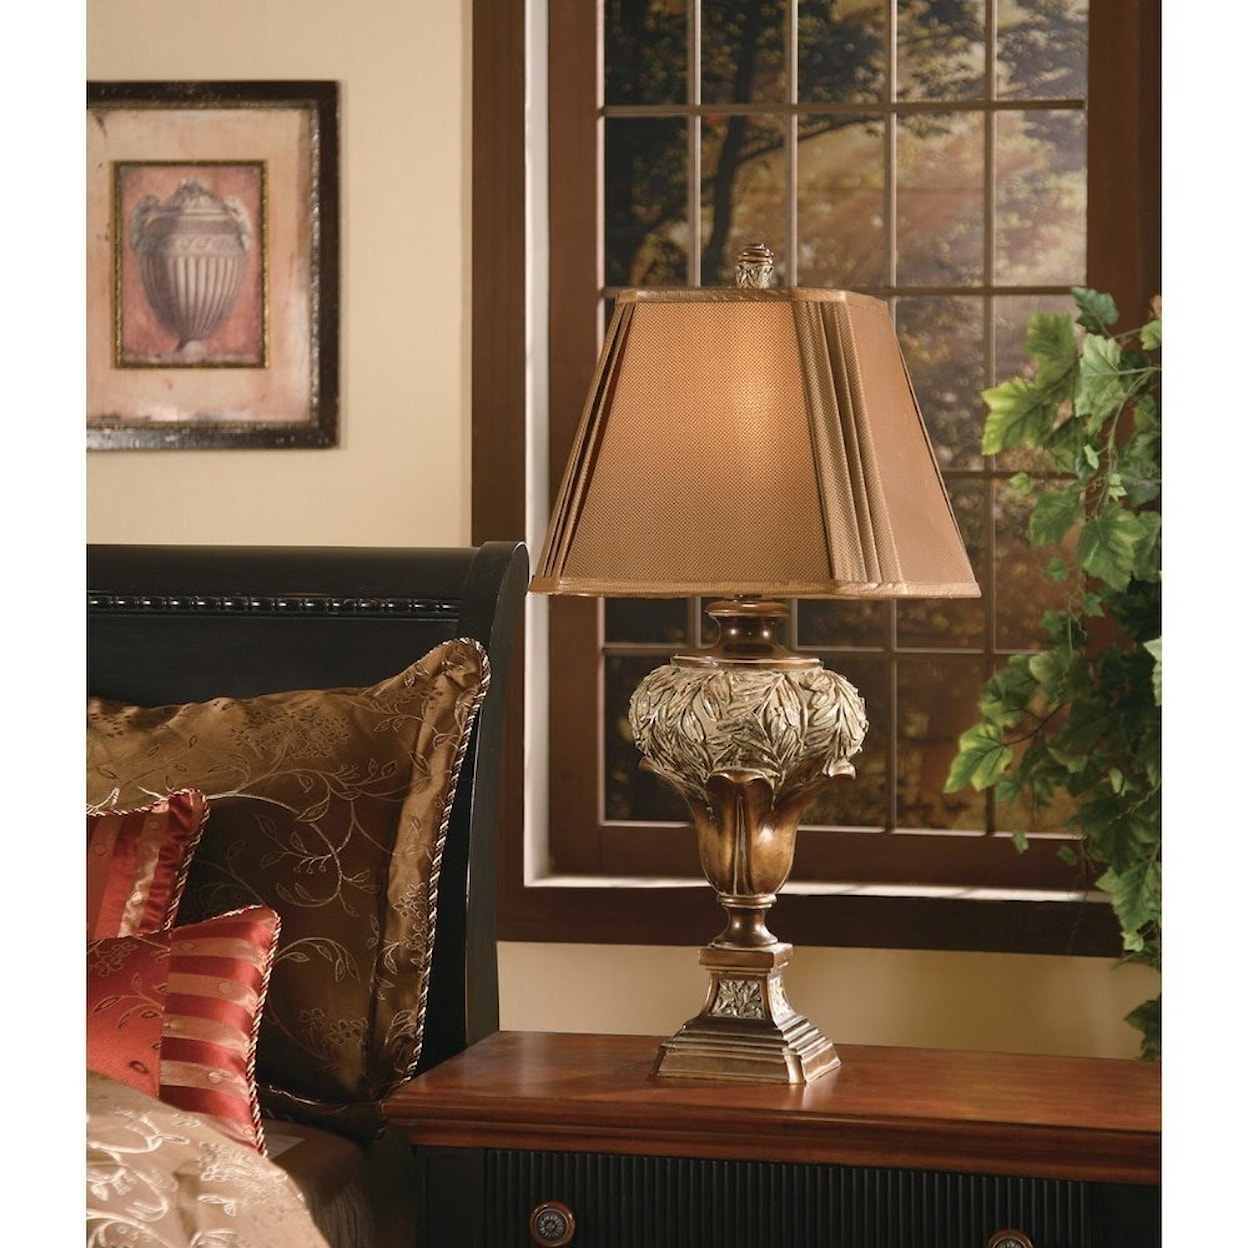 Crestview Collection Lighting Wingate Table Lamp